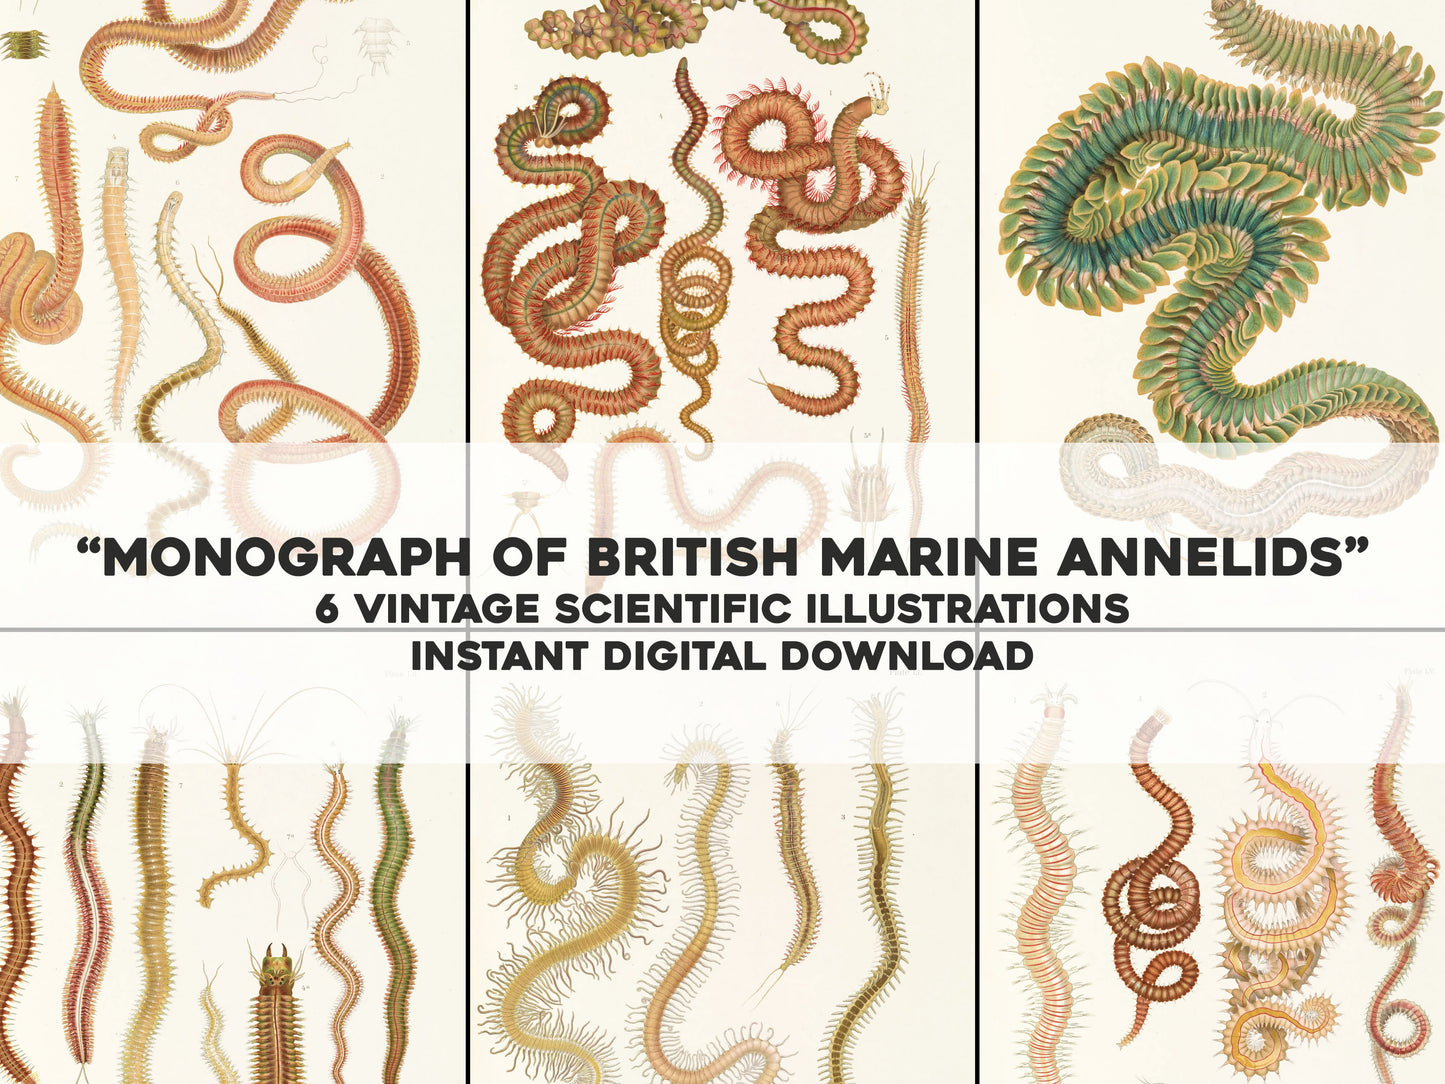 Monograph of the British Marine Annelids [6 Images]